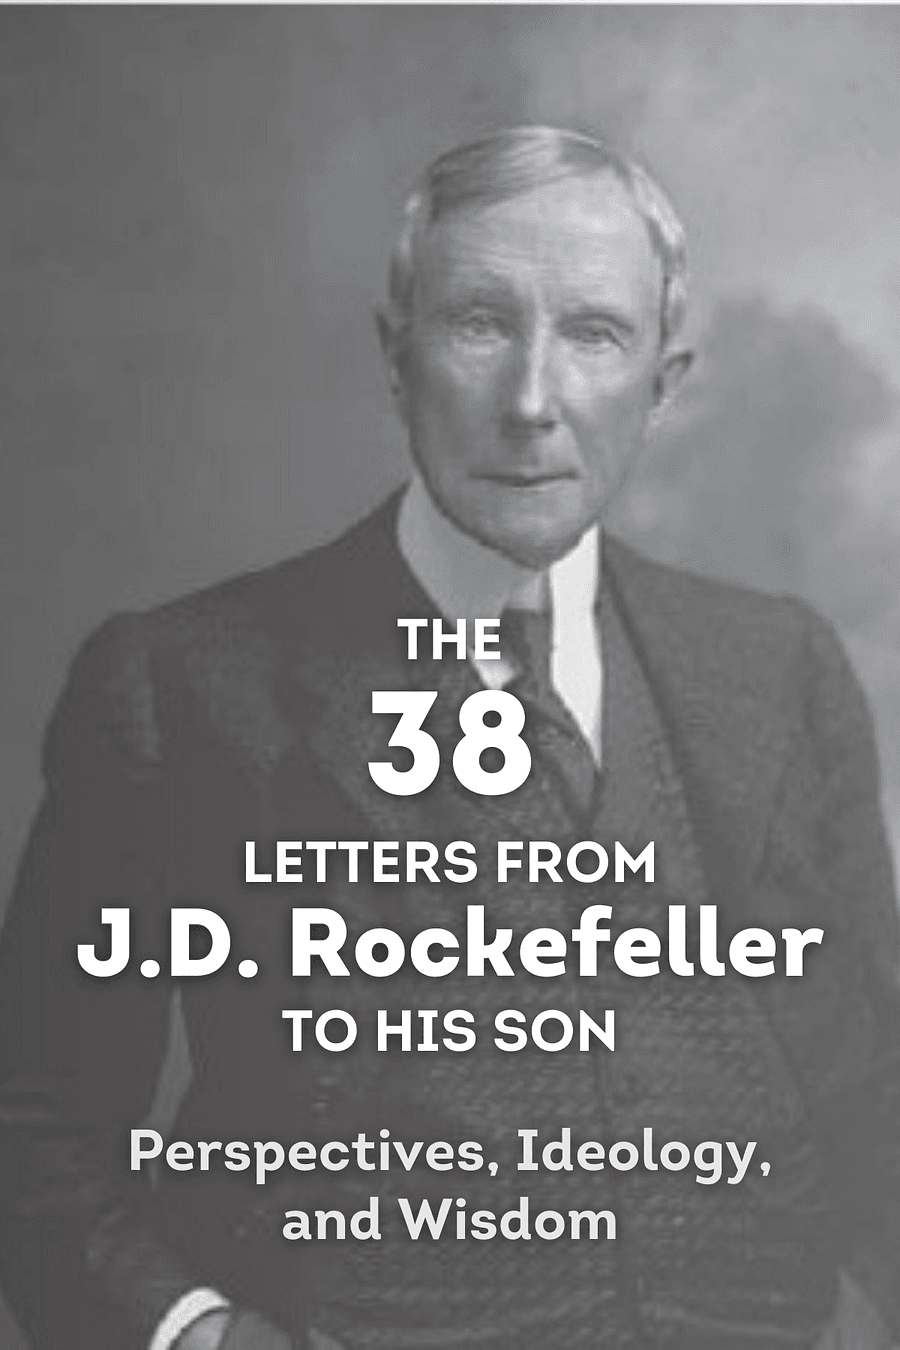 The 38 Letters from J.D. Rockefeller to his son by G. Ng - Book Summary